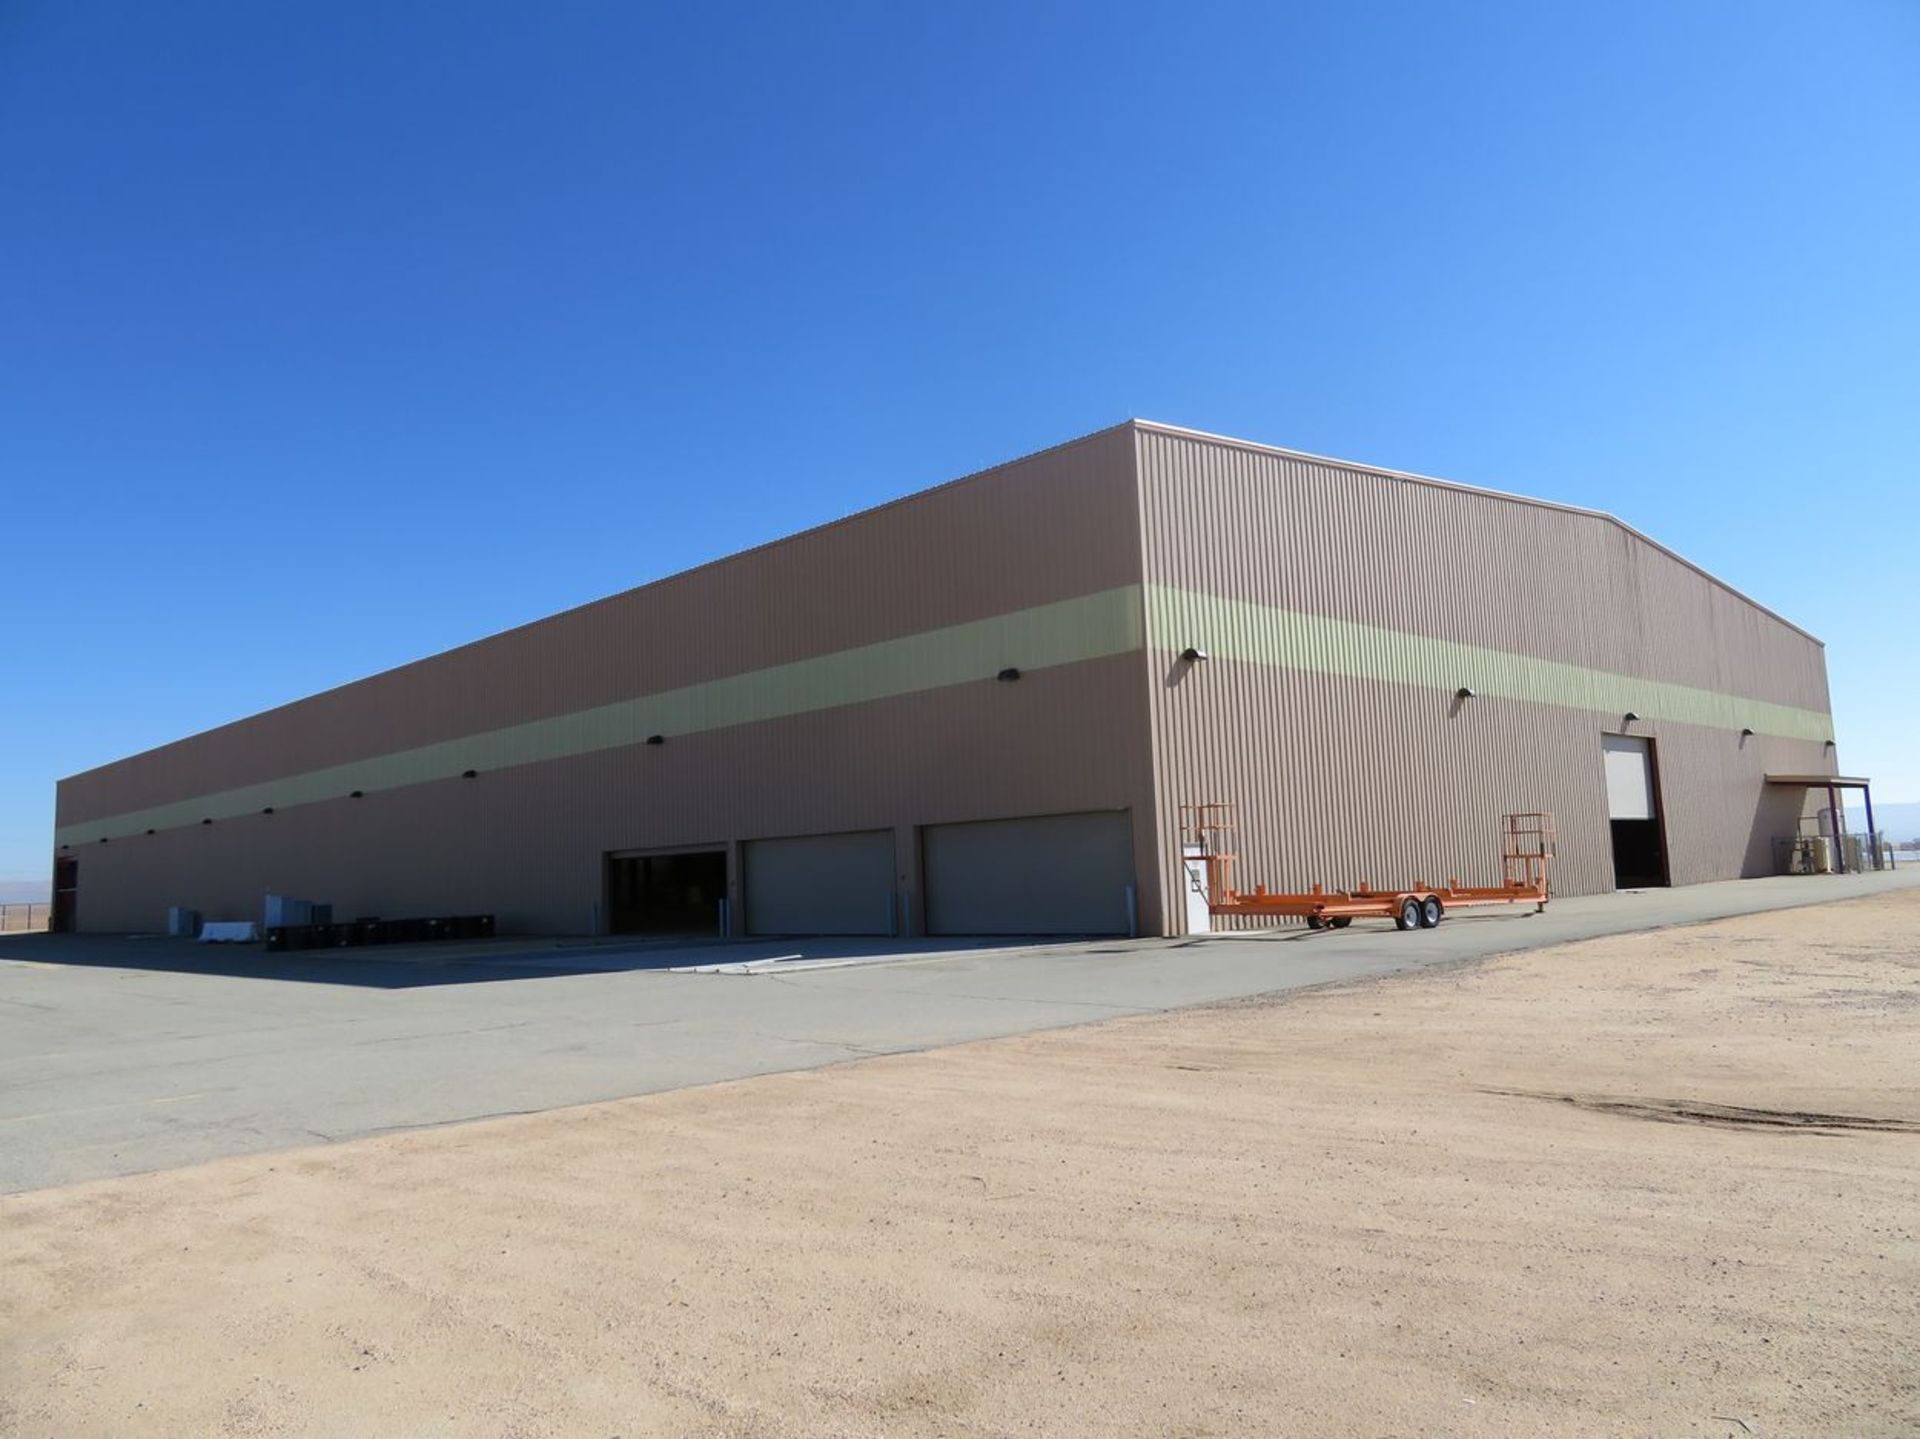 Steel Building. Includes (2) Approx. 59' x 392' Bays, (1) Approx.. 59' x 484' Bay, (6) Approx. 28'W